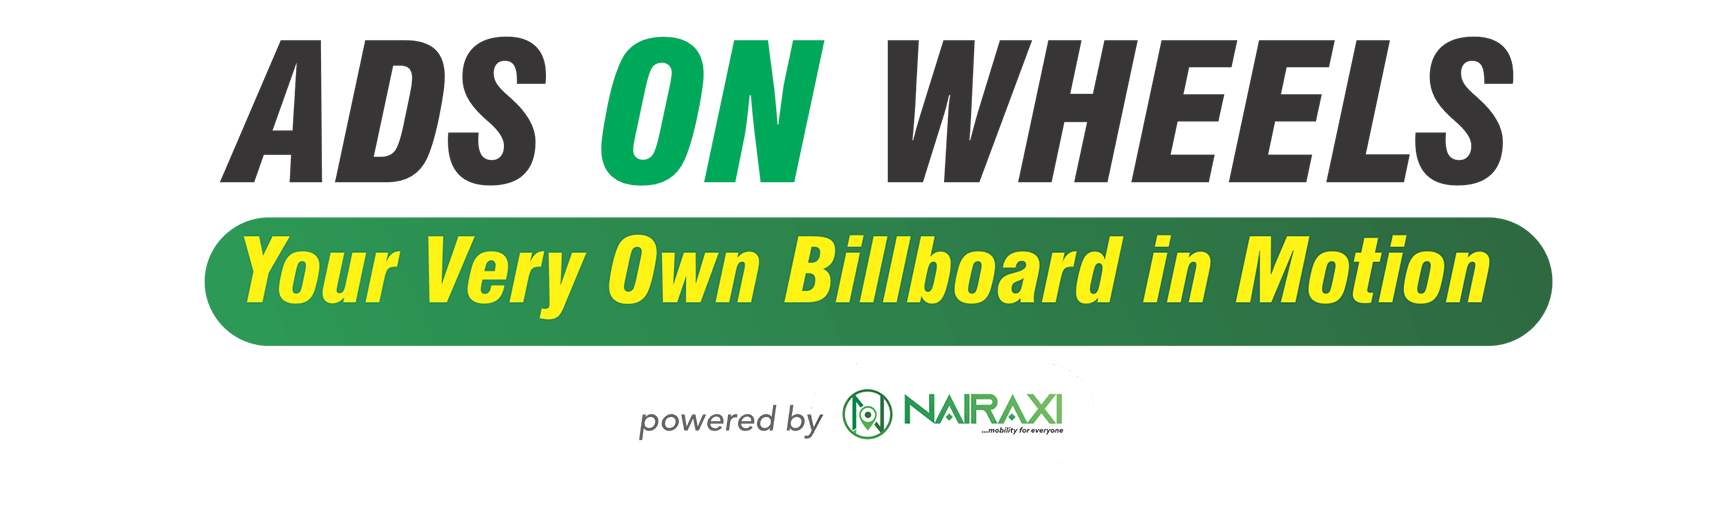 ads on wheels powered by NAIRAXI